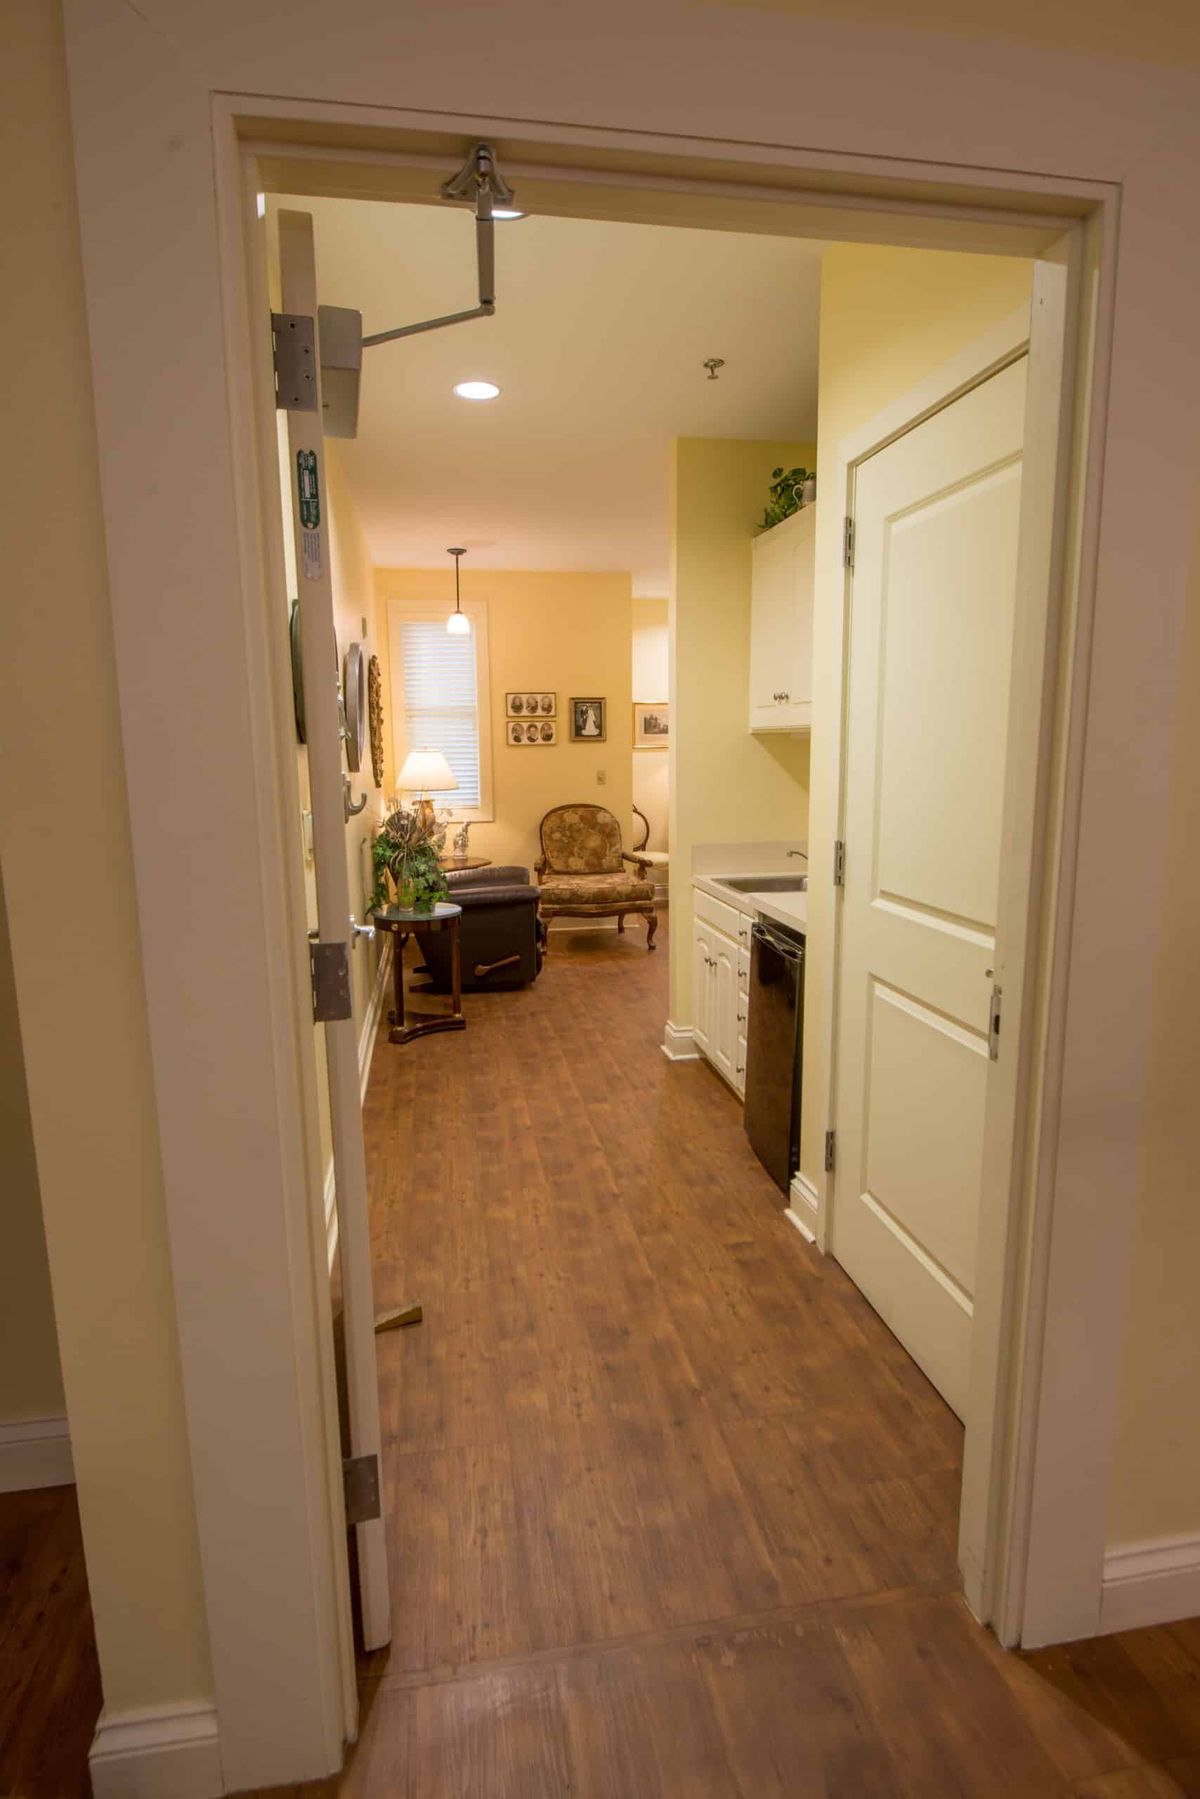 Interior view of hardwood flooring and architecture in a cottage at The Glen senior living community.